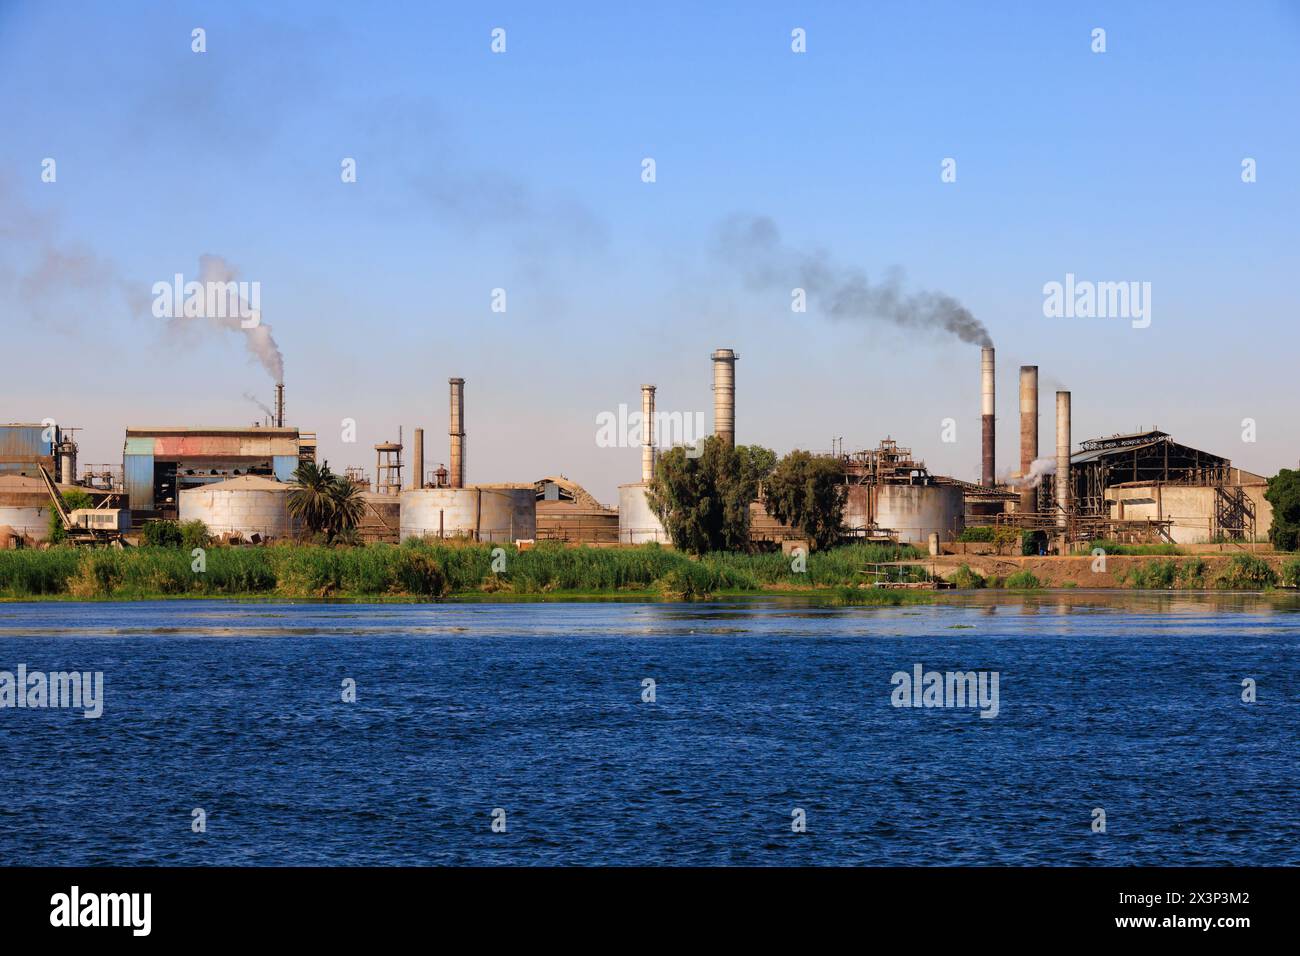 Smoke pollution belching from factory chimneys, Kom Elemeir sugar mill on the banks of the River Nile, Edfu, Aswan, Egypt Stock Photo